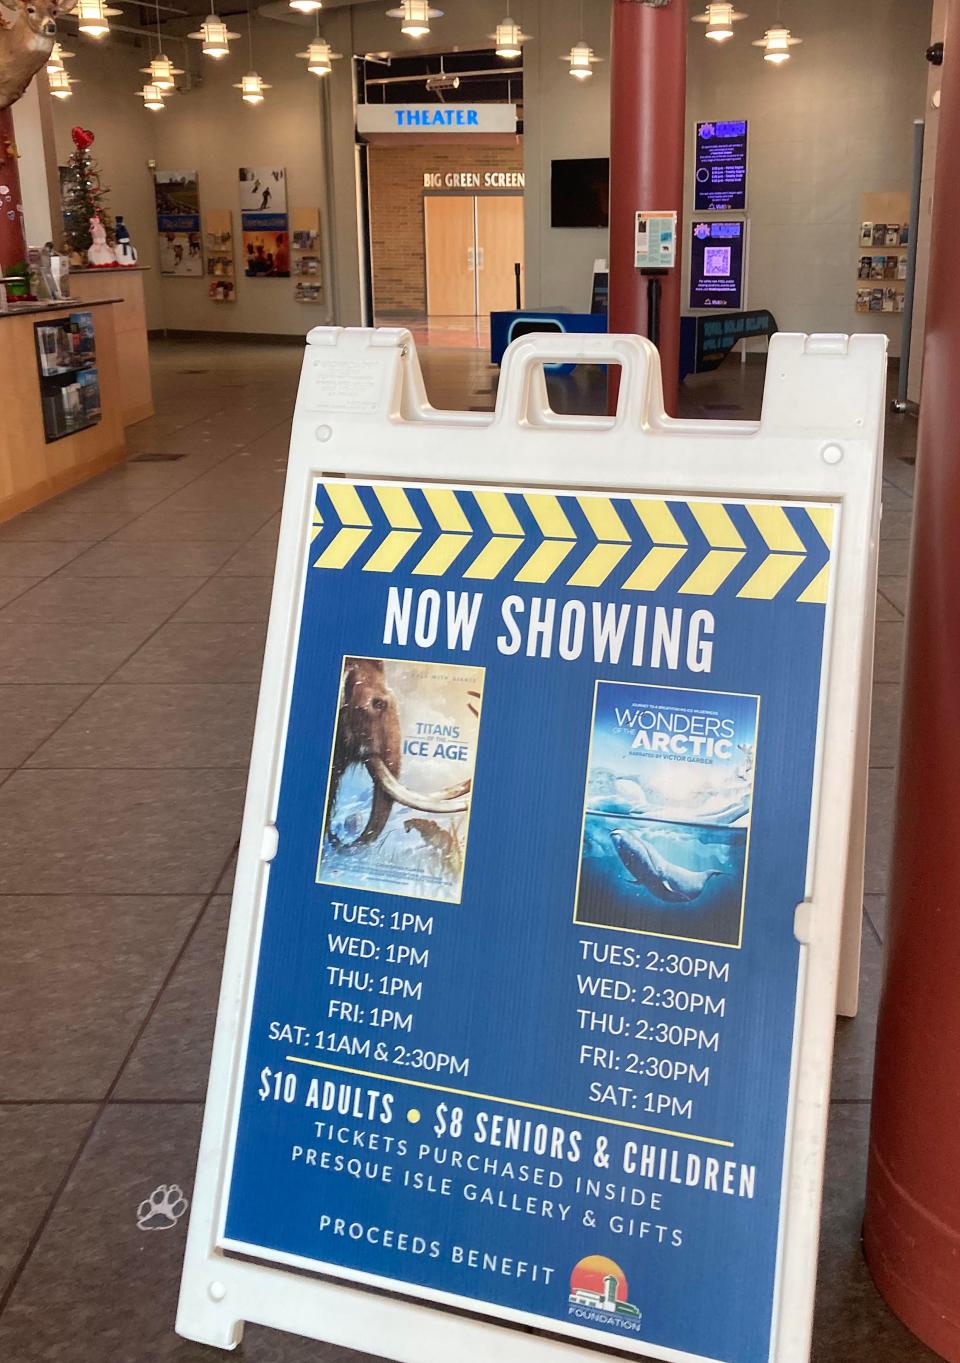 The big screen theater in the Tom Ridge Environmental Center, 301 Peninsula Drive, reopened Feb. 20 with showings of "Titans of the Ice Age" and "Wonders of the Arctic."